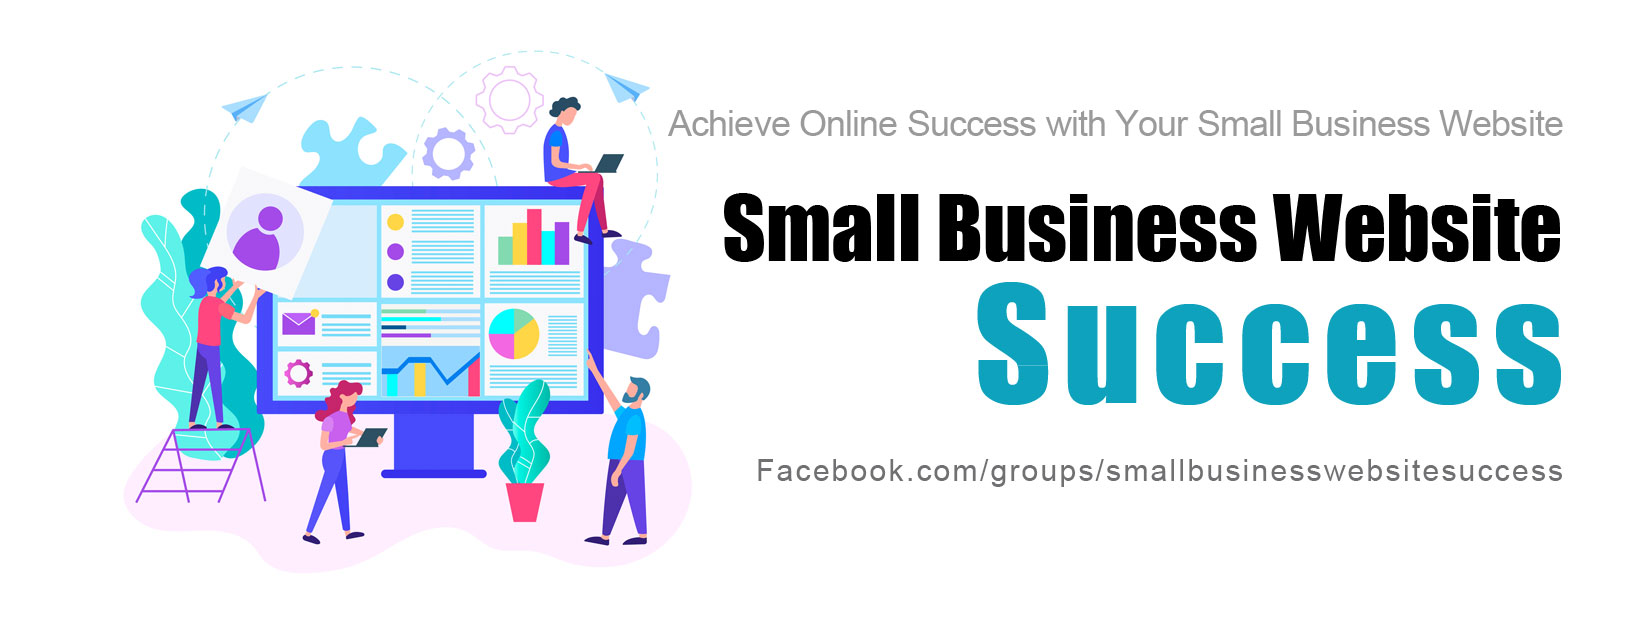 Join our Facebook group for small business website success